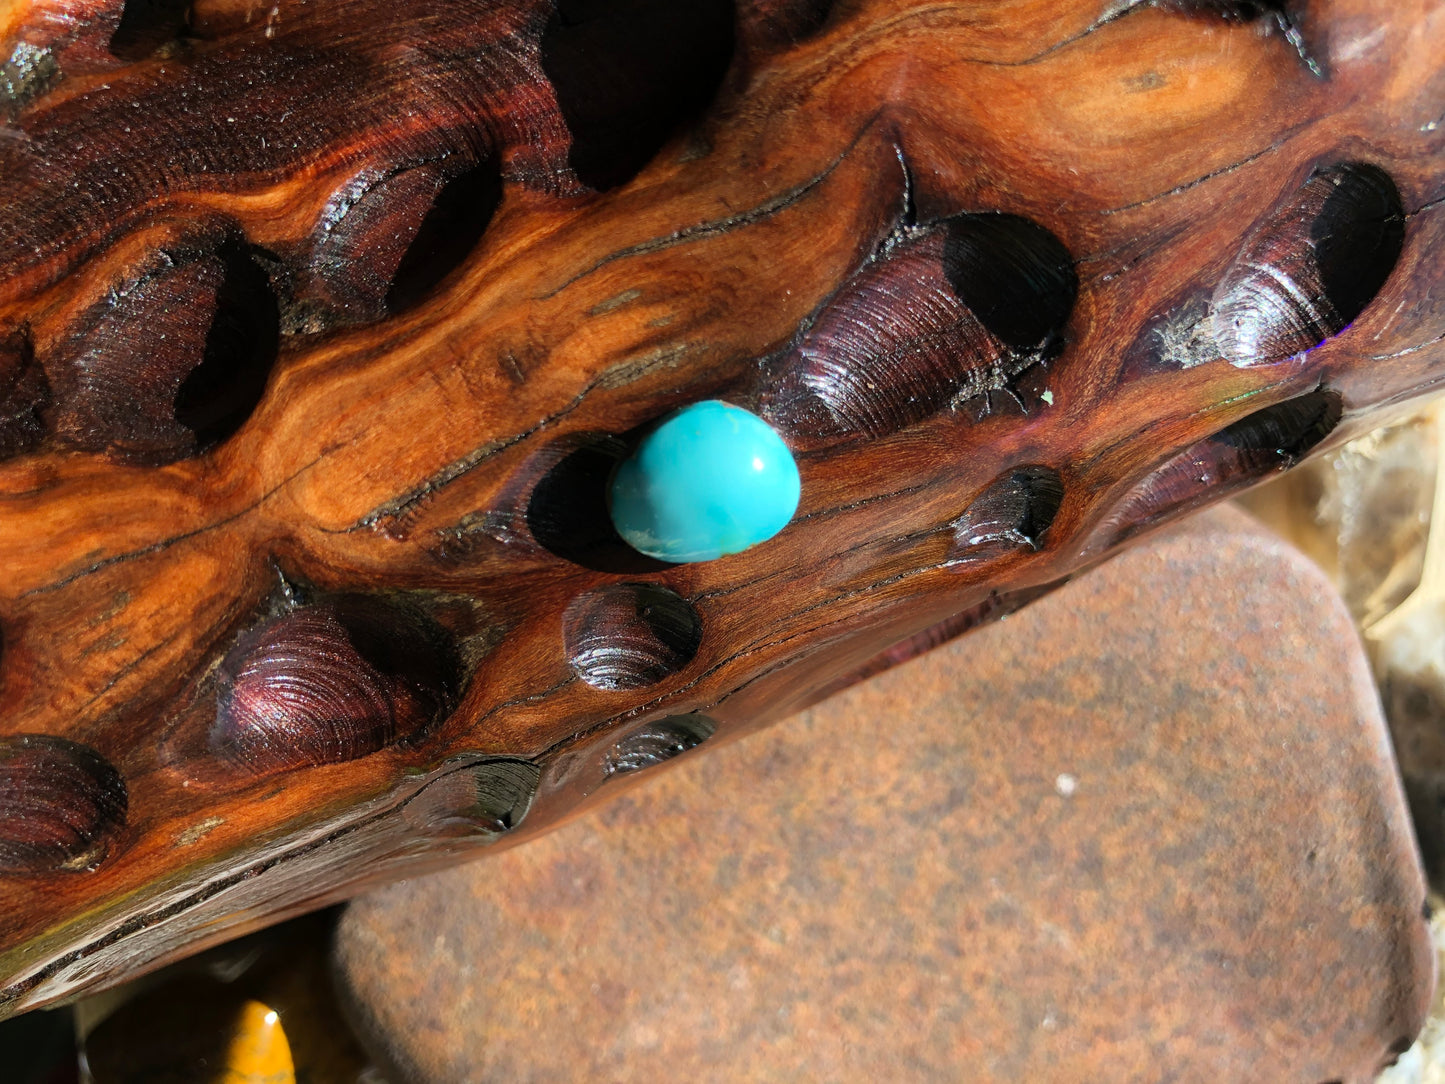 Natural Turquoise Cabochon - Silver Fox Mine